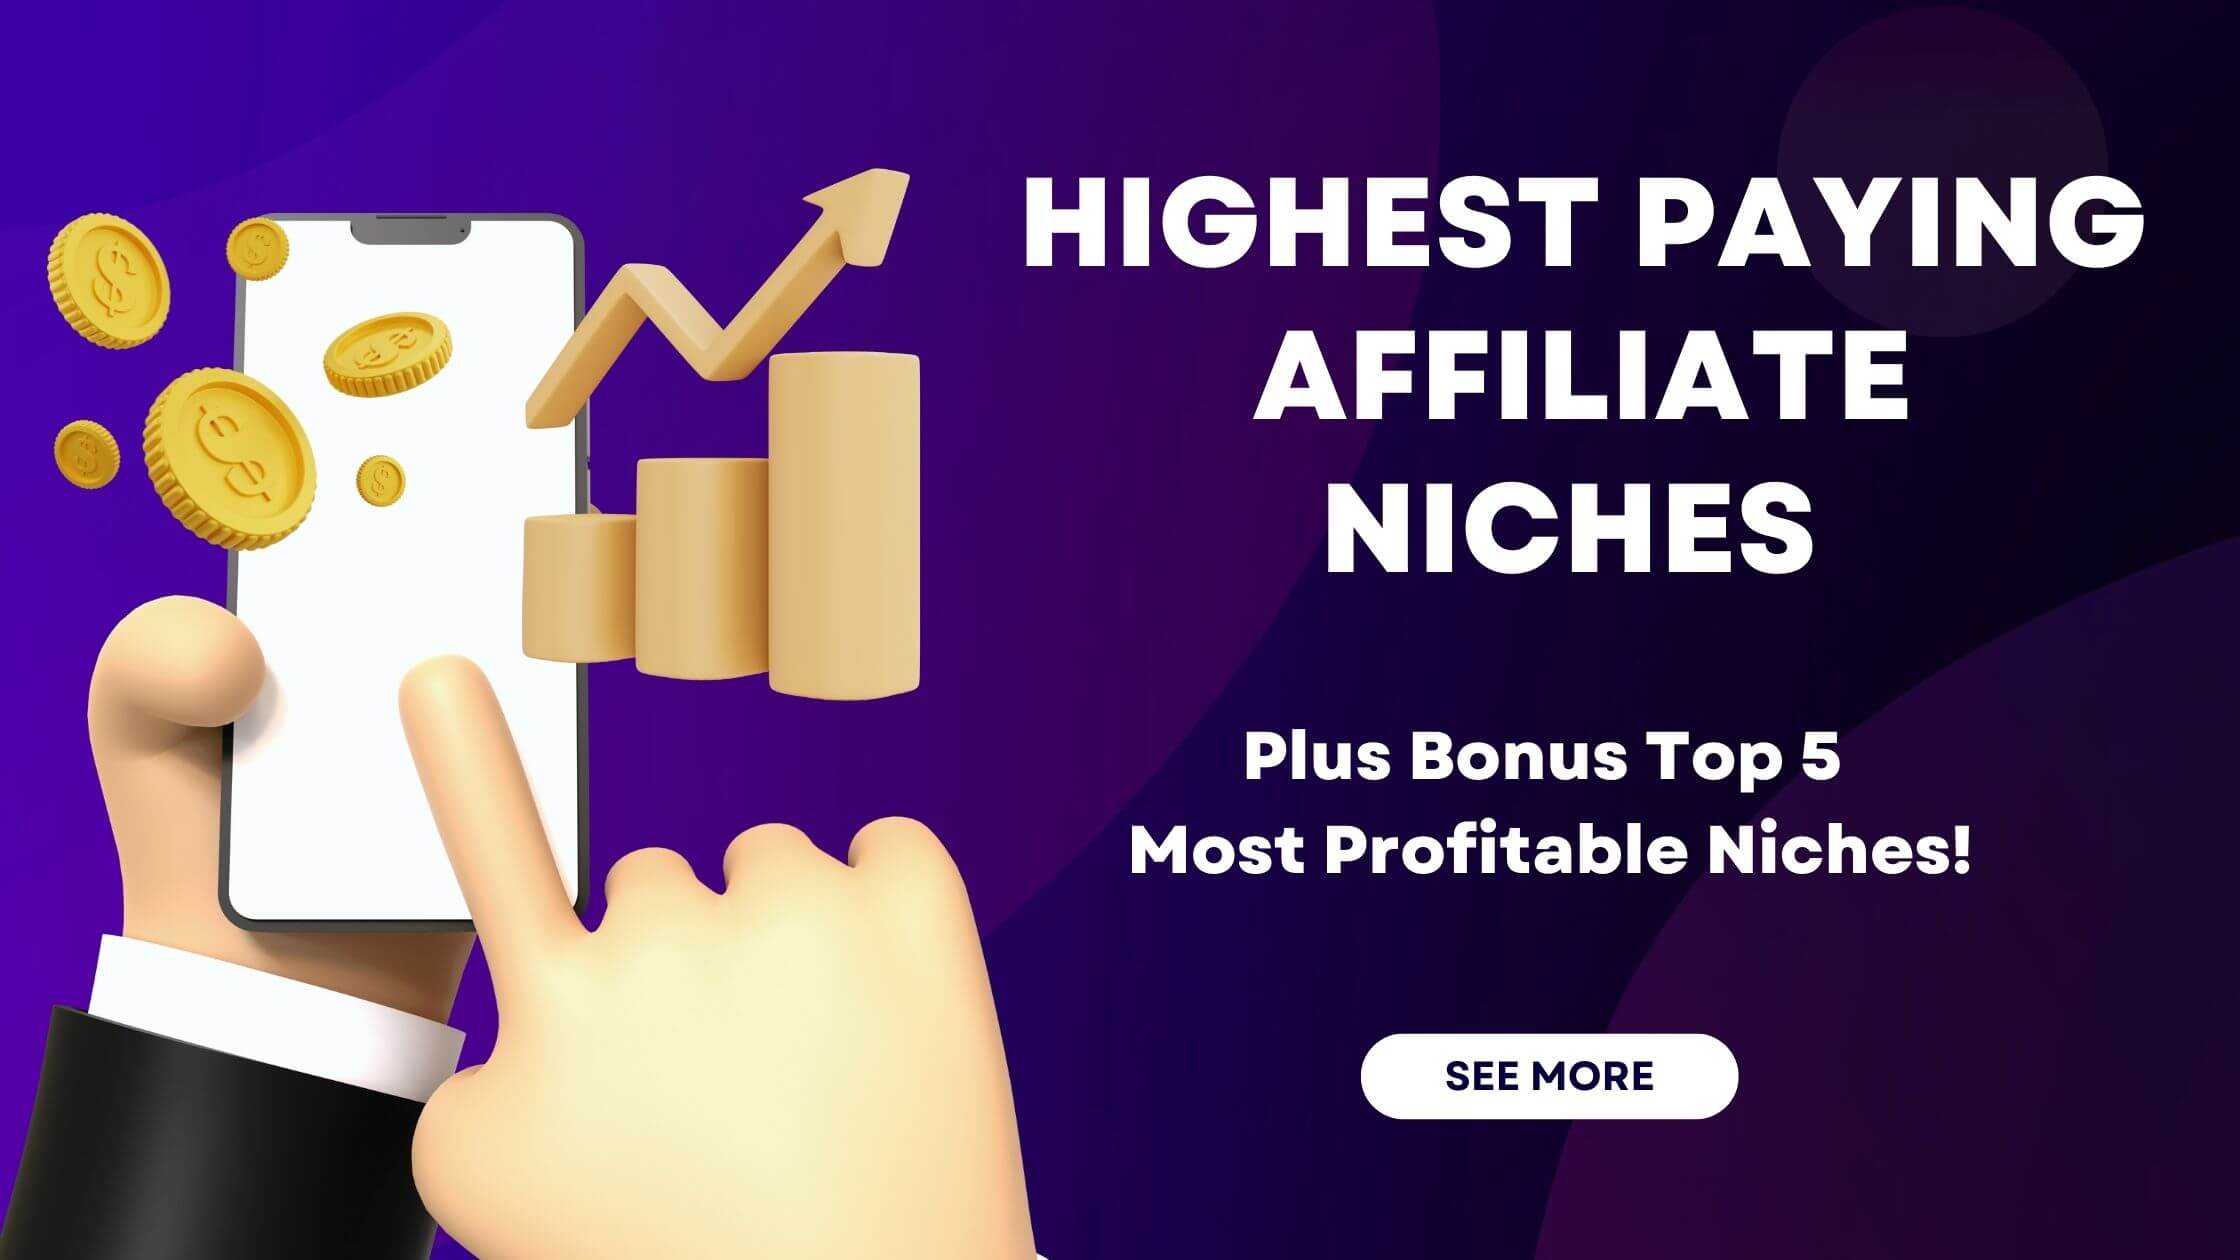 How To Find The Best High Paying Affiliate Niches